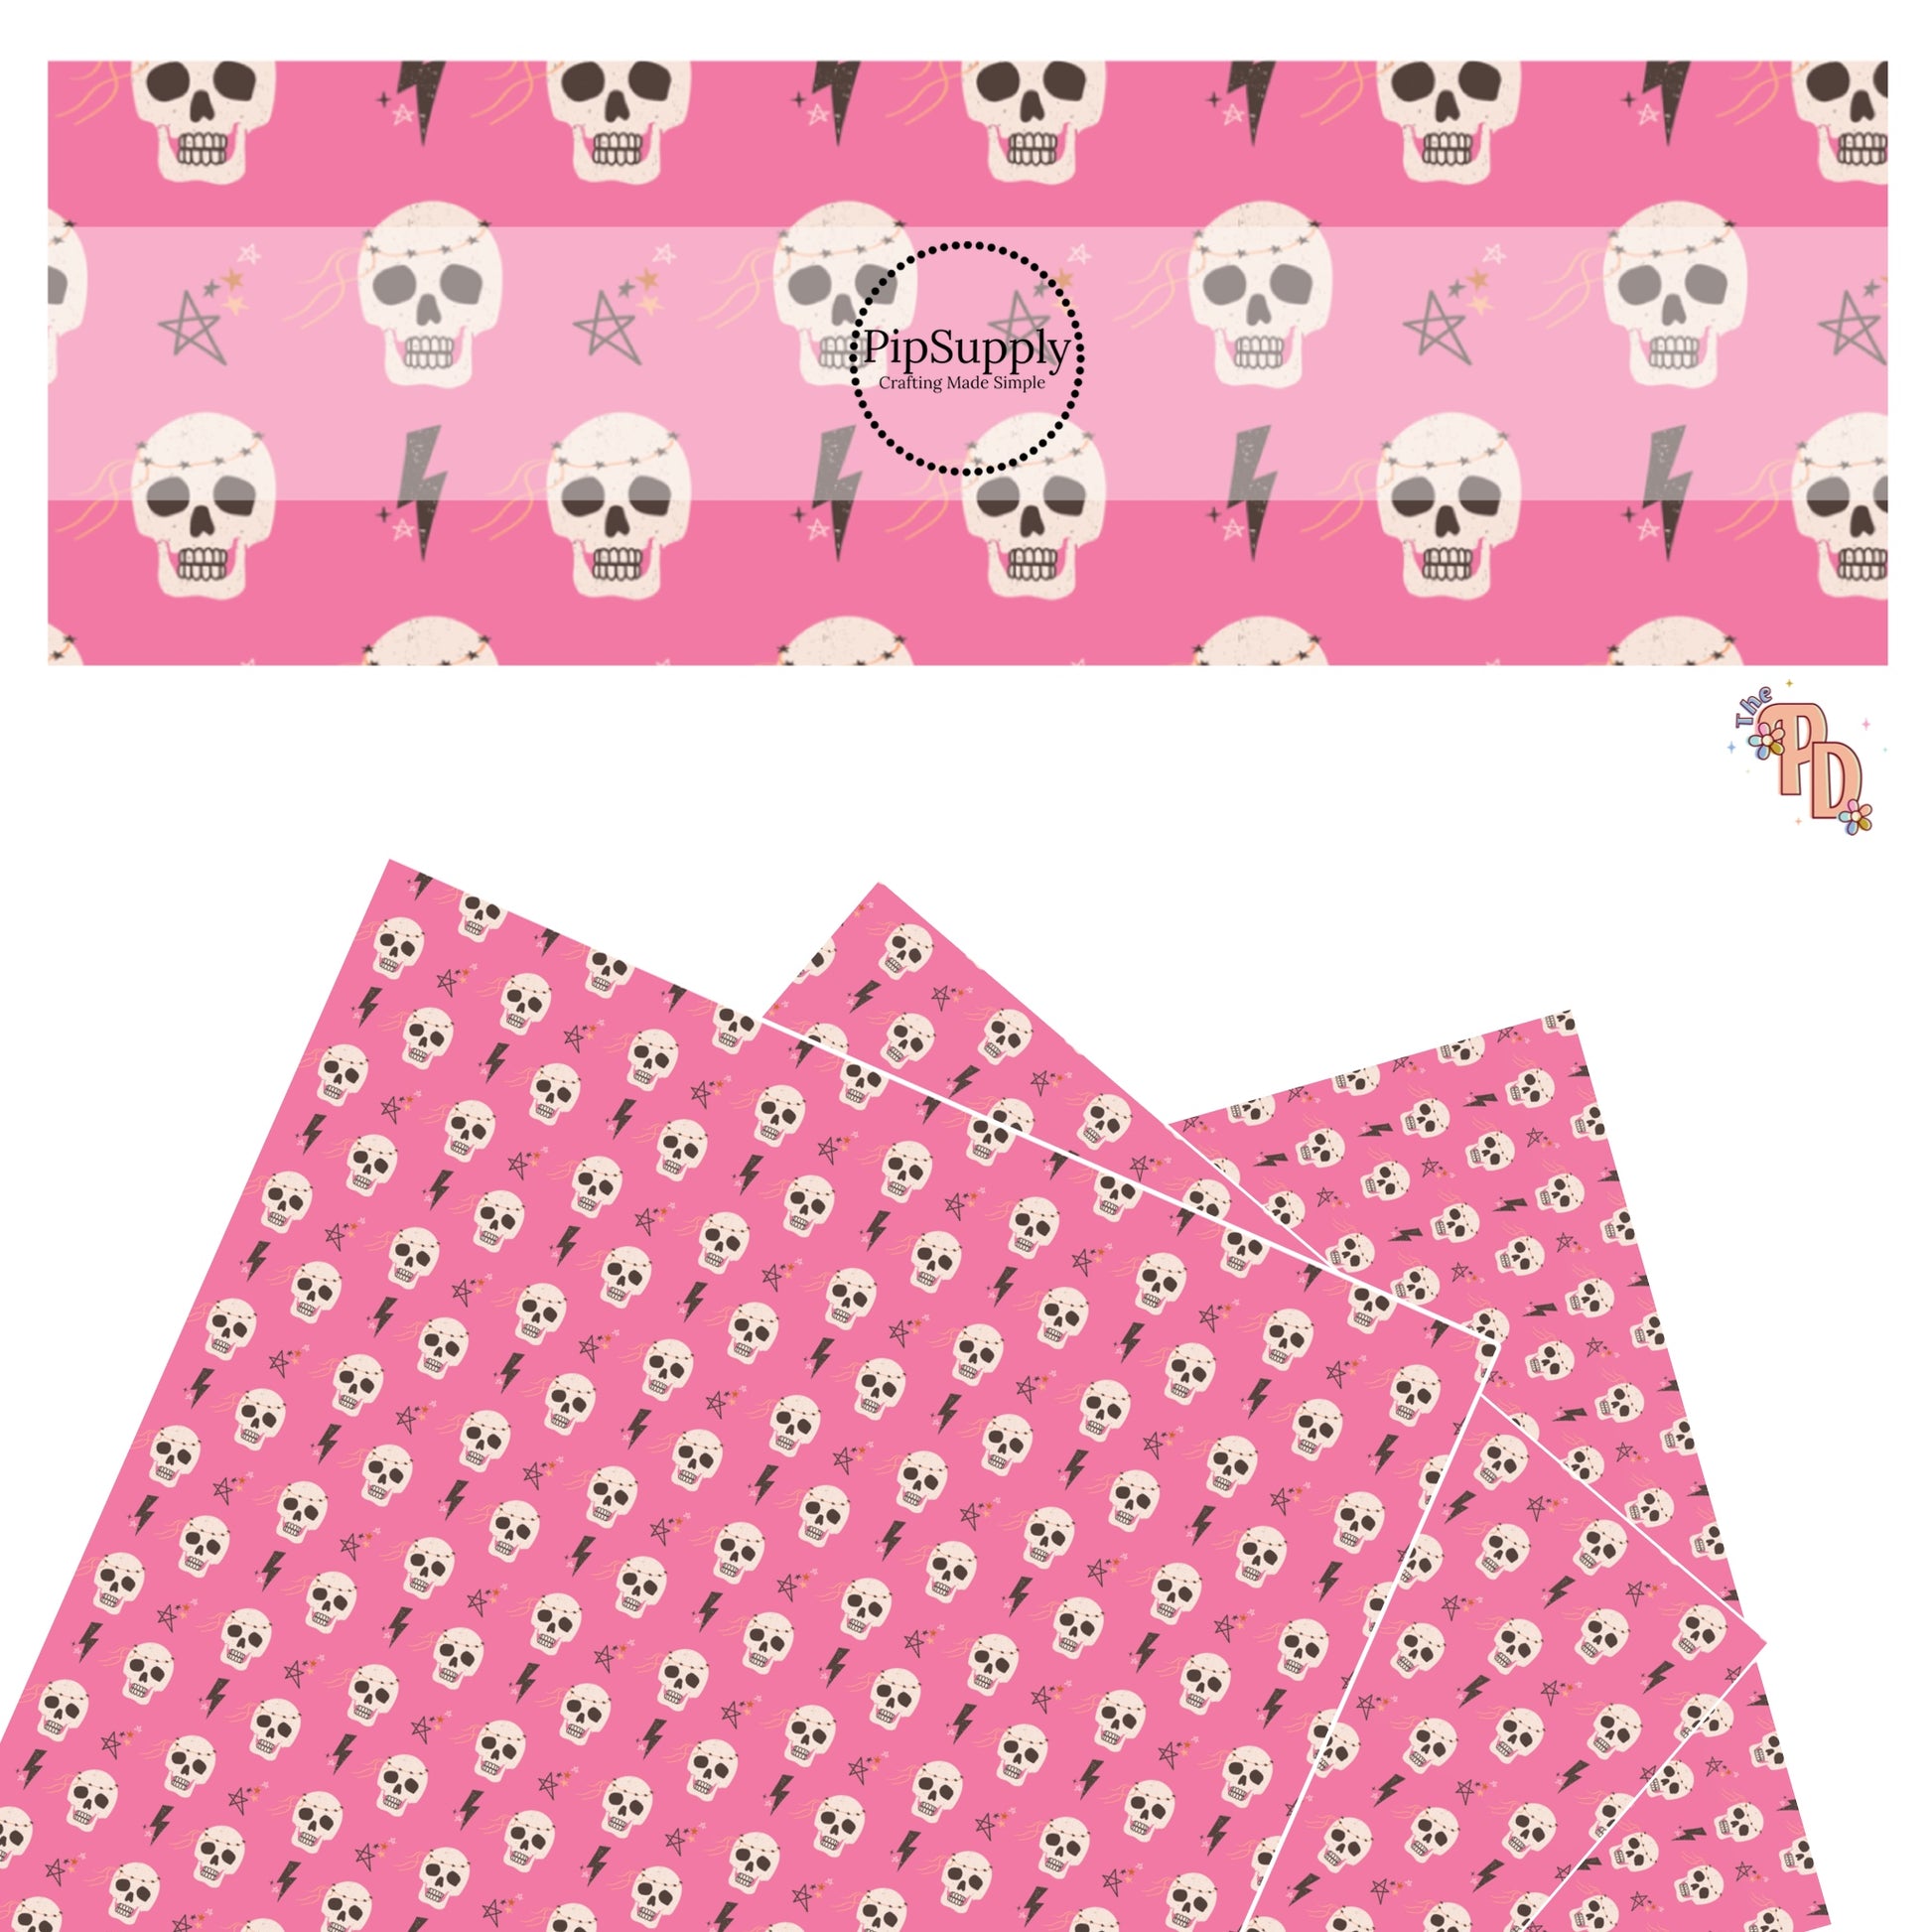 Skulls, lightning bolts, and stars on pink faux leather sheets